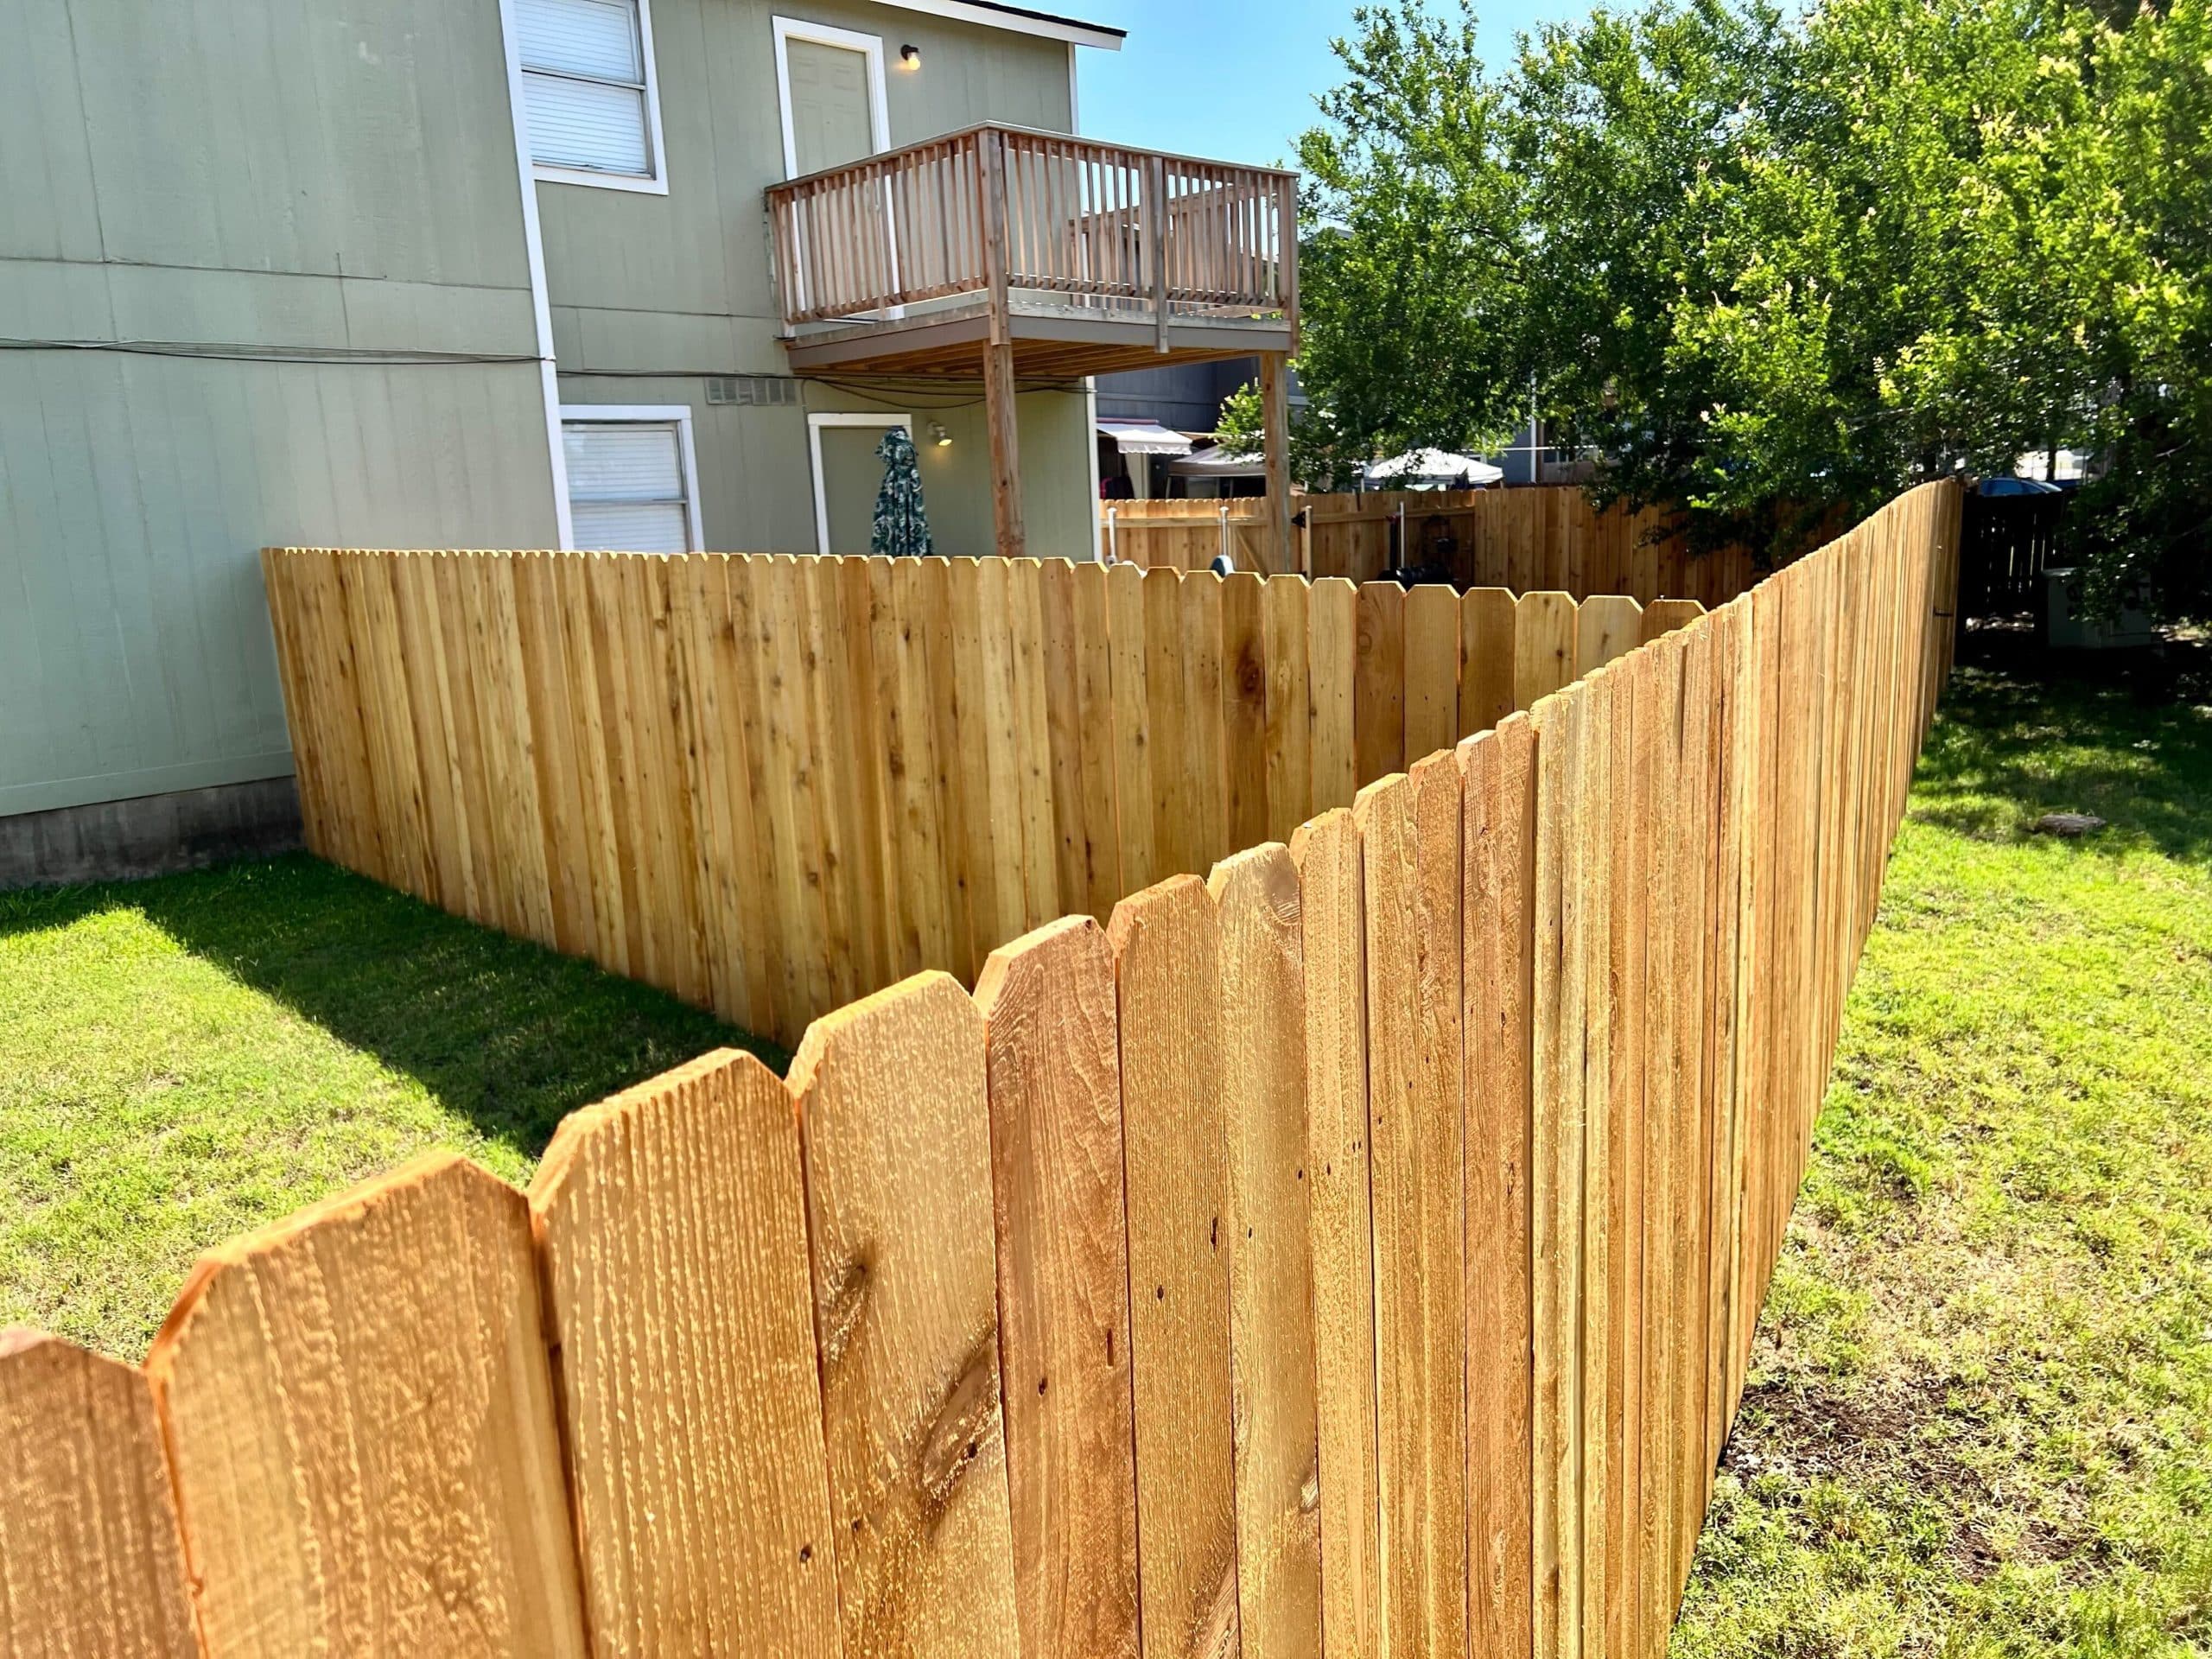 15 Types of Wood Fences That Look Great & Provide Privacy